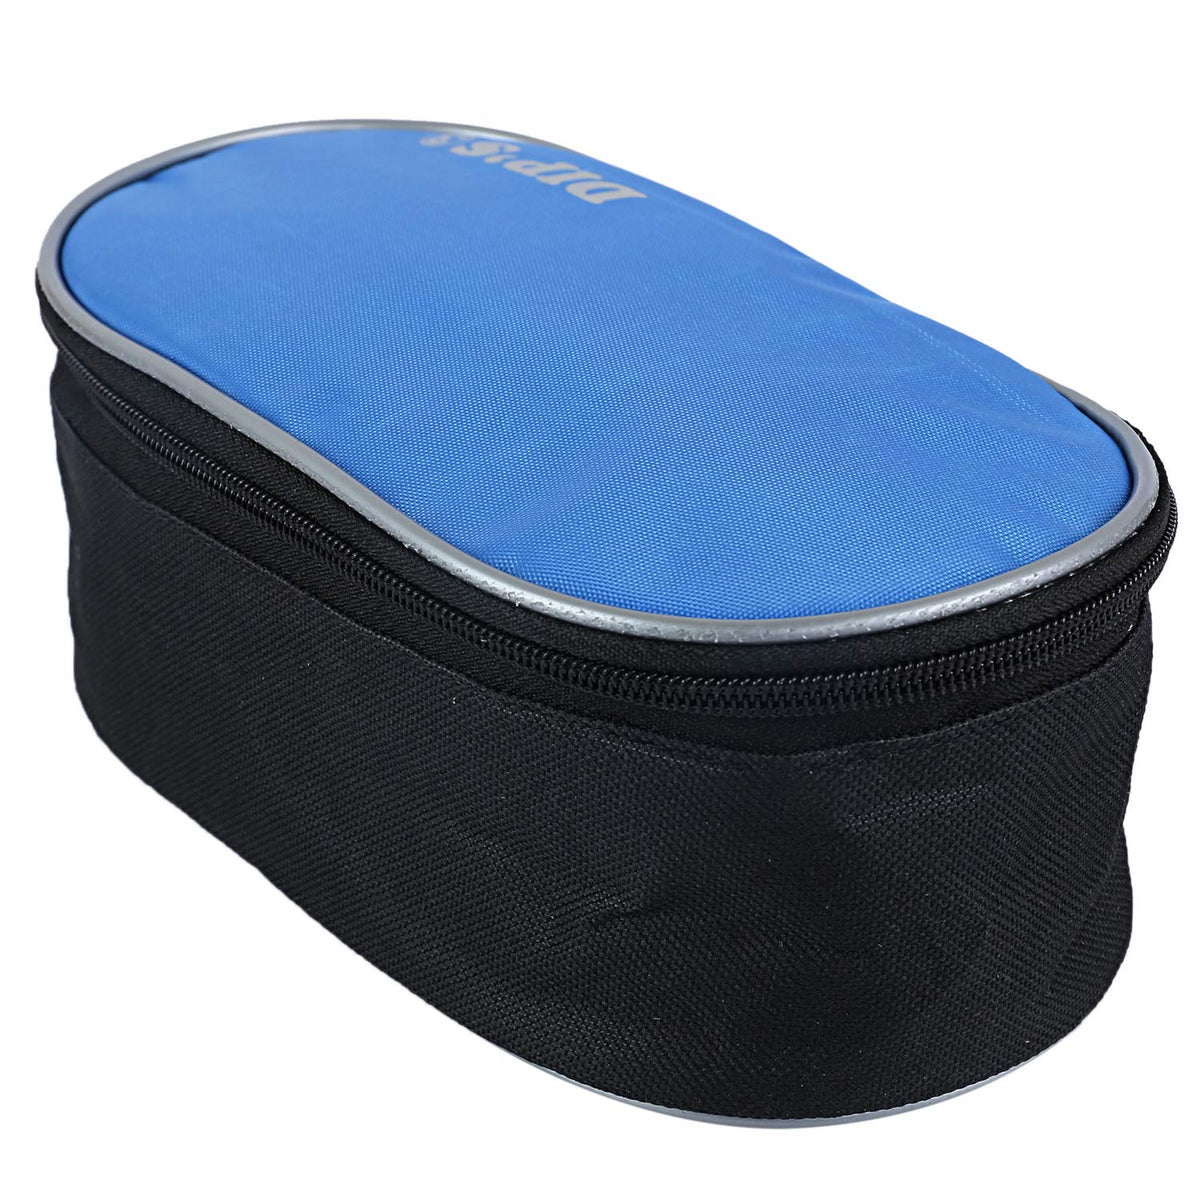 Kuber Industries Lunch Bag|Lunch Box Cover Bag Only|Lunch Tote Bag|Kids Lunch Bag (Blue & Black, Polyester)